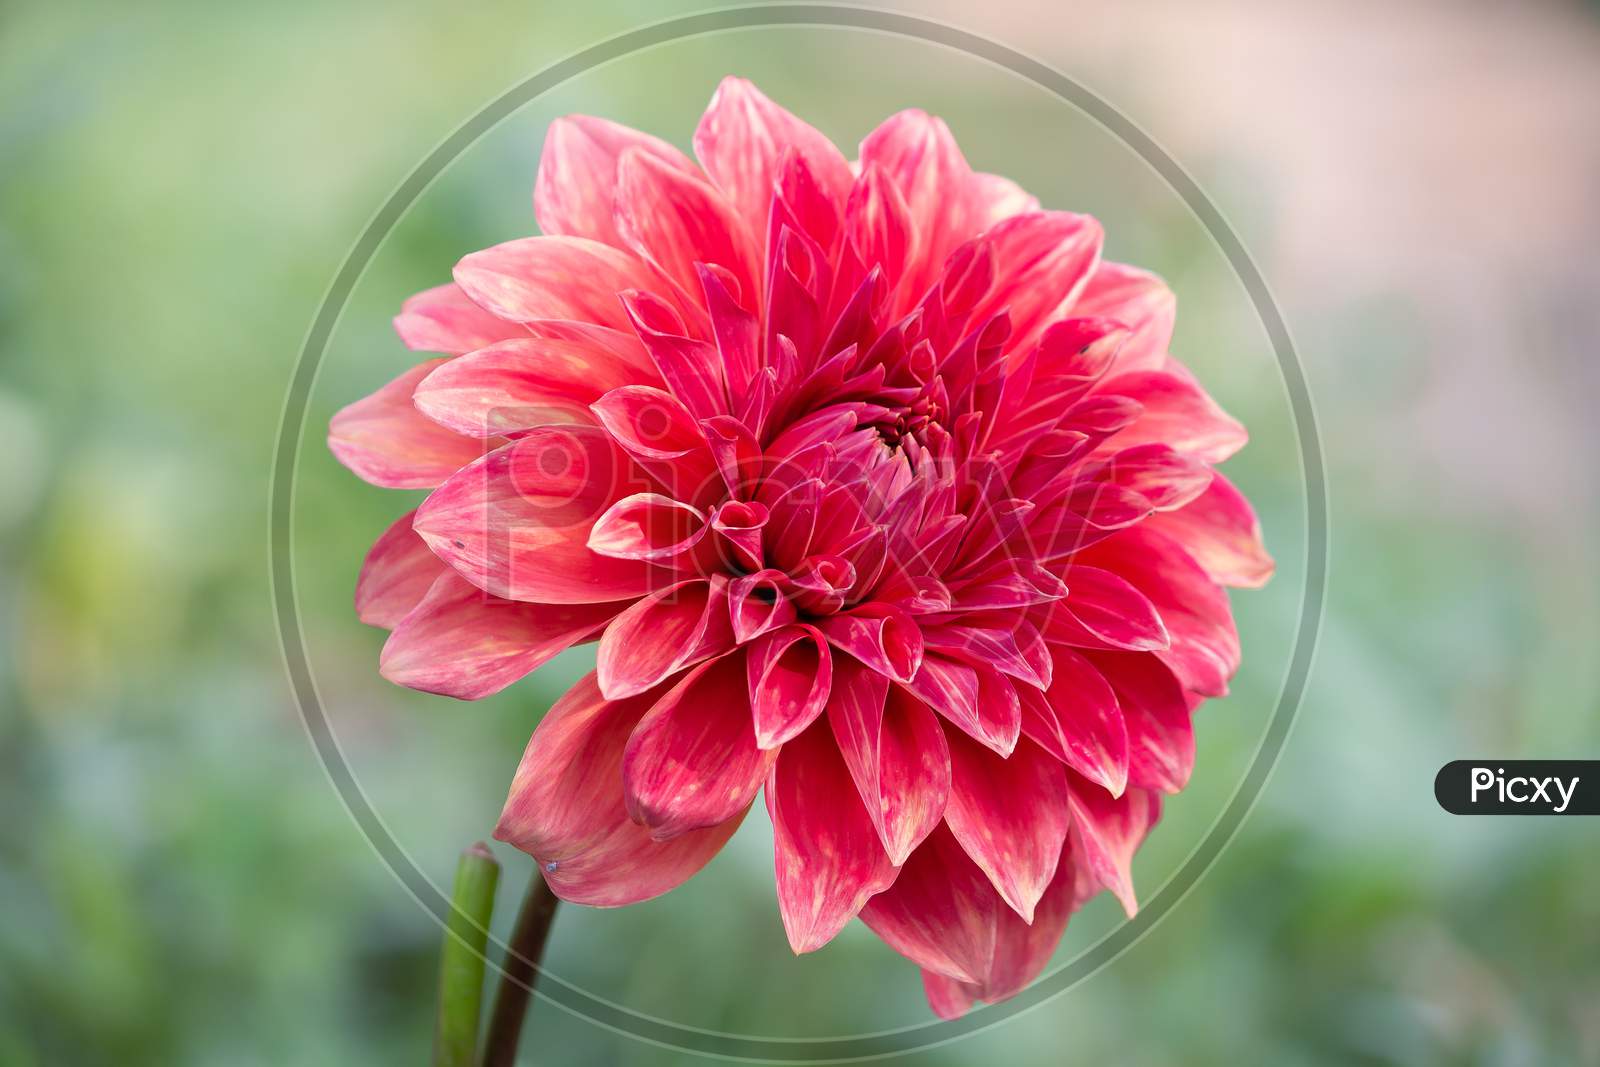 Close Up View Of Red Daisy Flower In The Park Over Green Blur Garden Background In Horizontal Frame